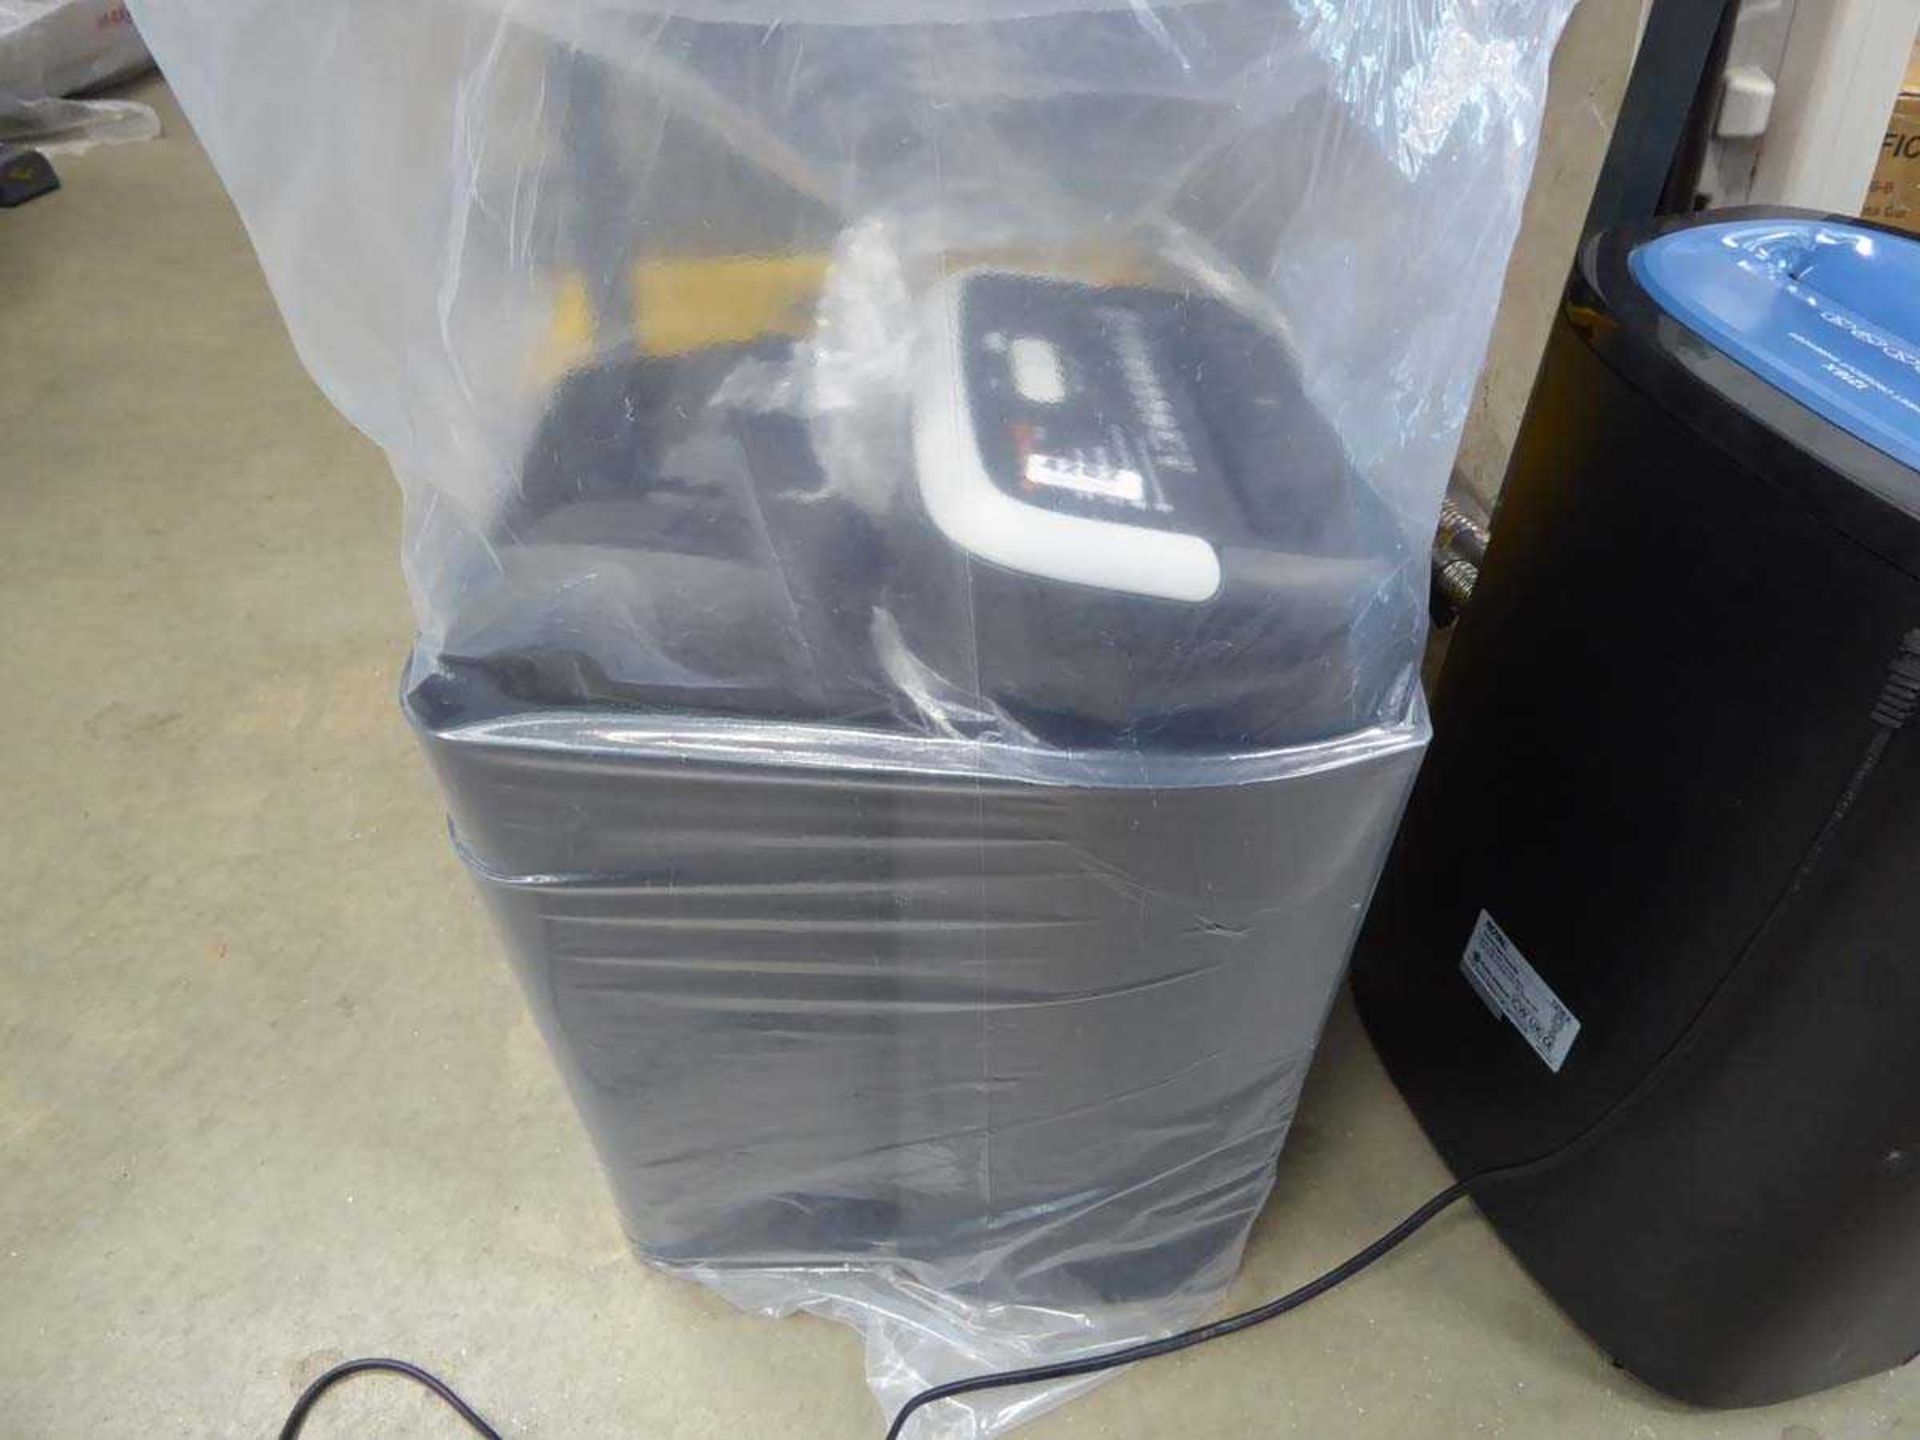 Bag containing small shredders